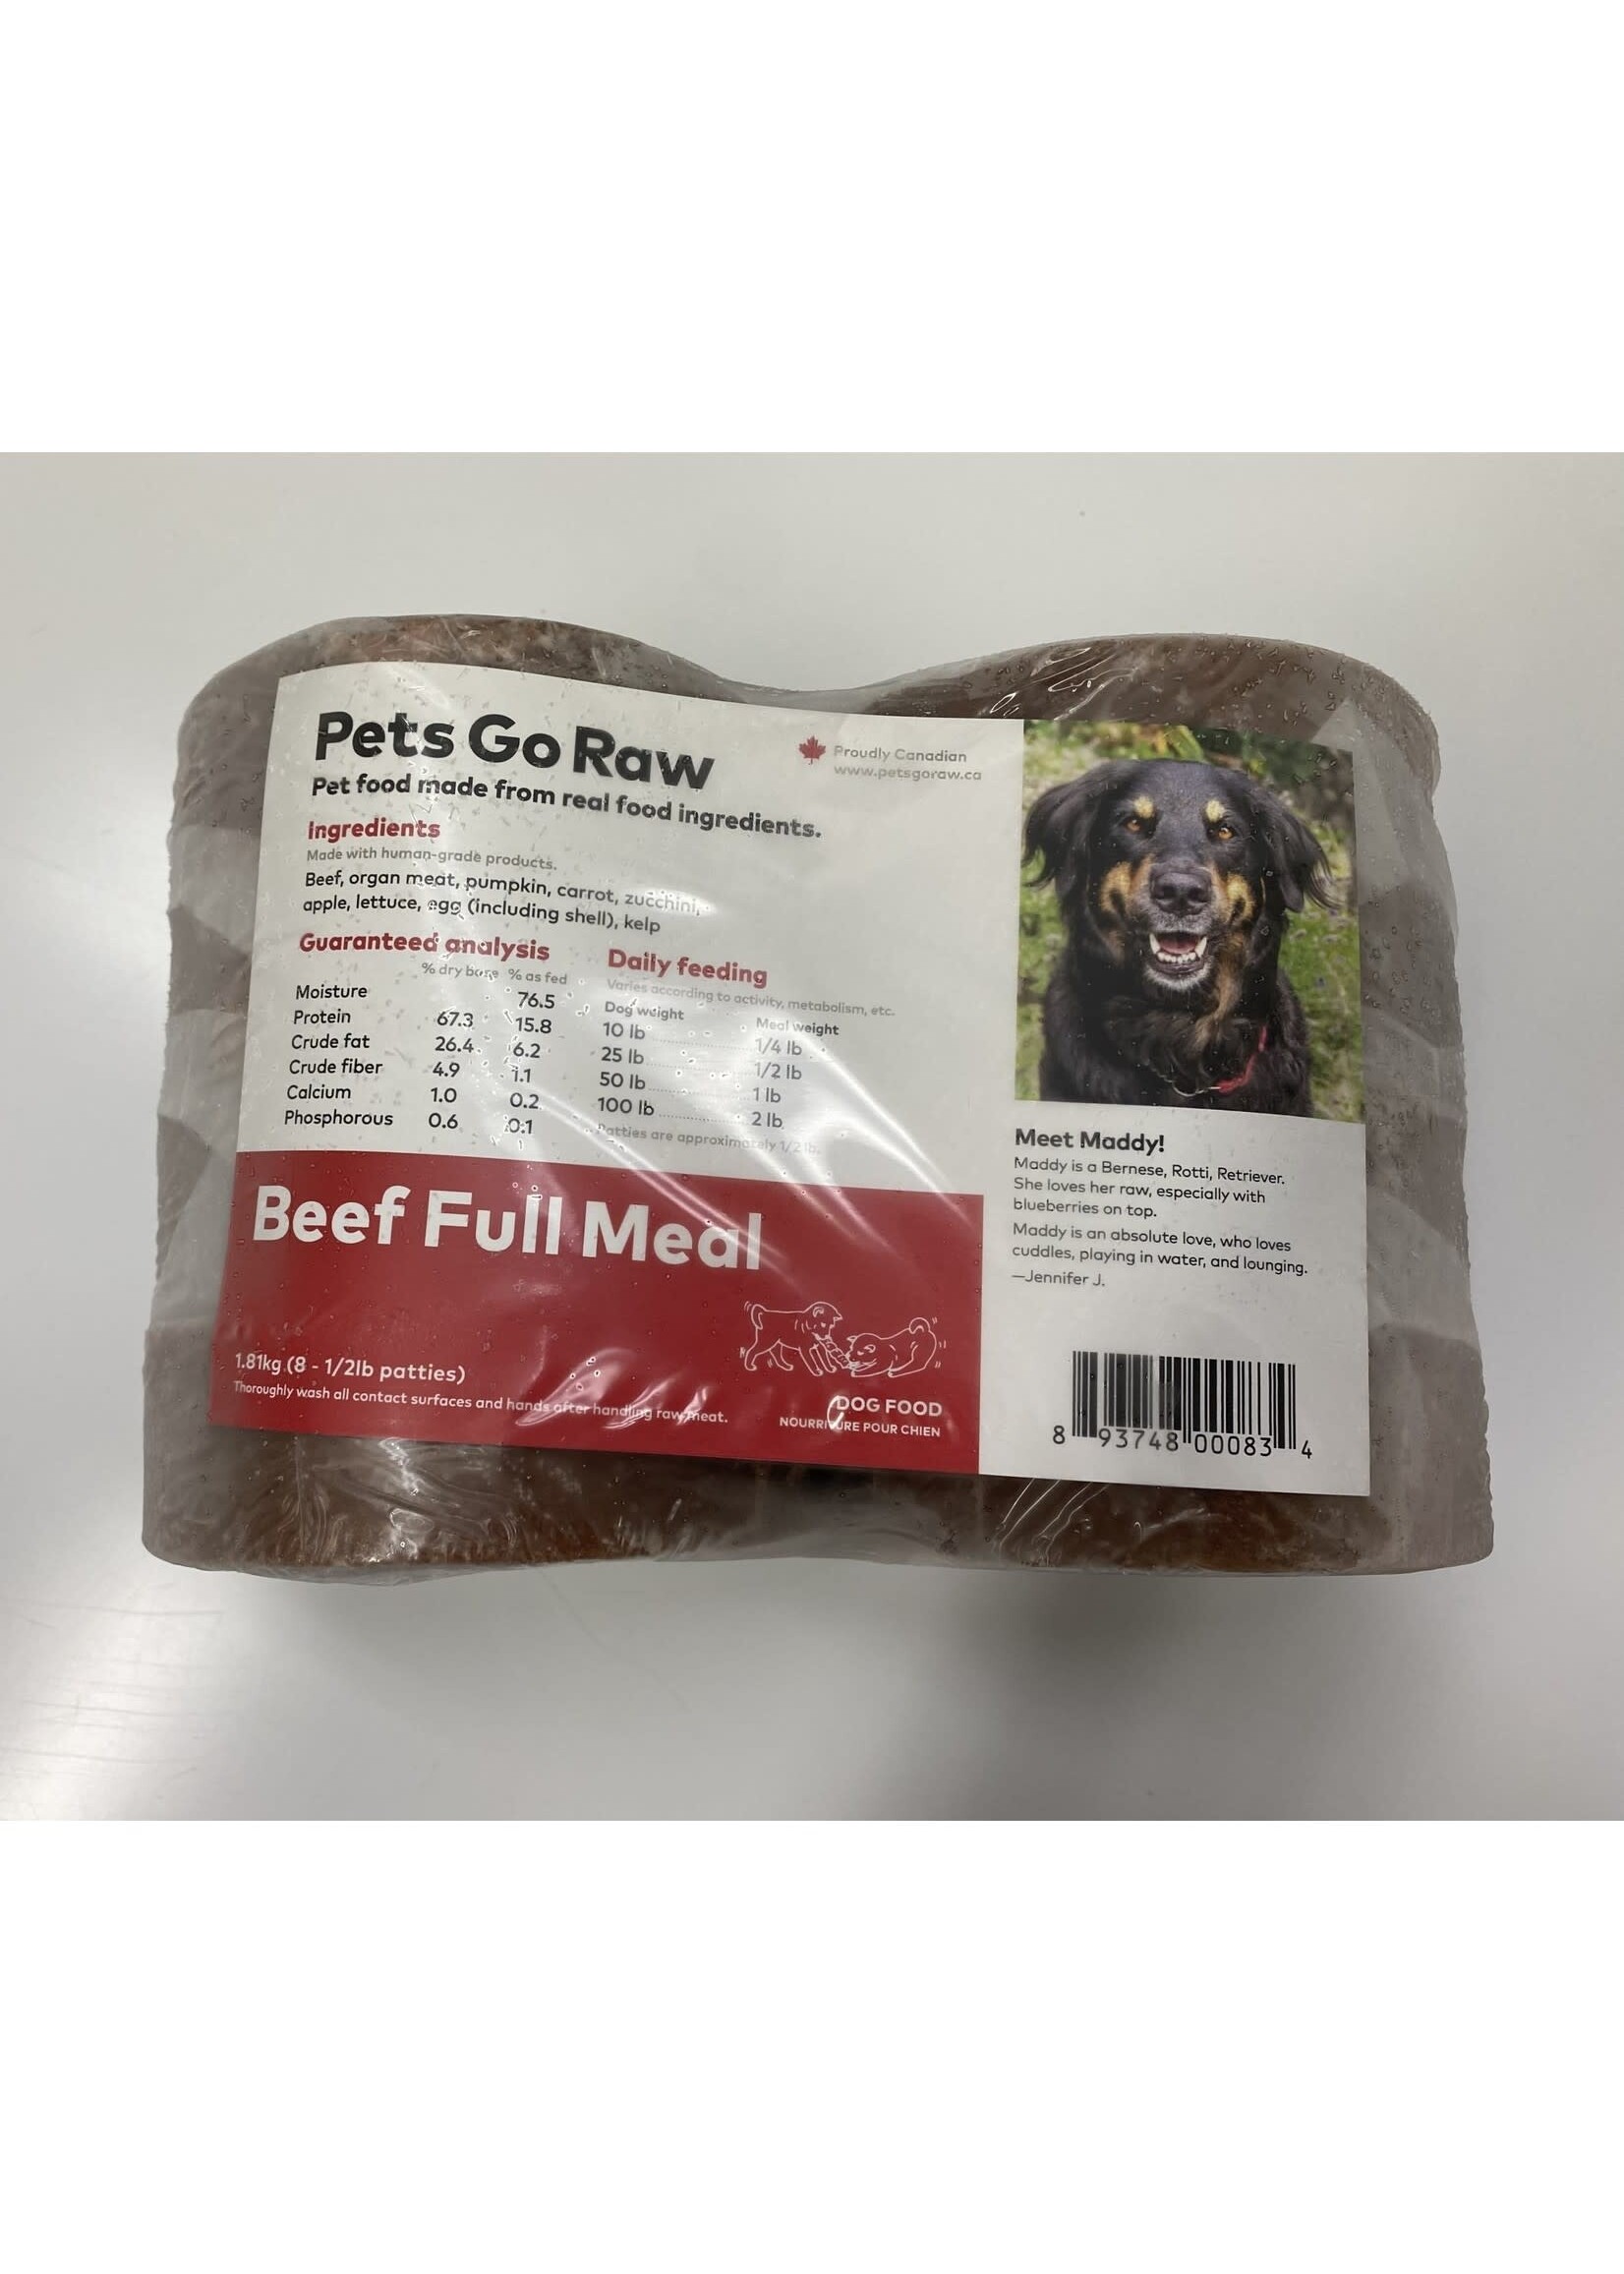 Pets Go Raw Pets Go Raw - Beef Full Meal Dog